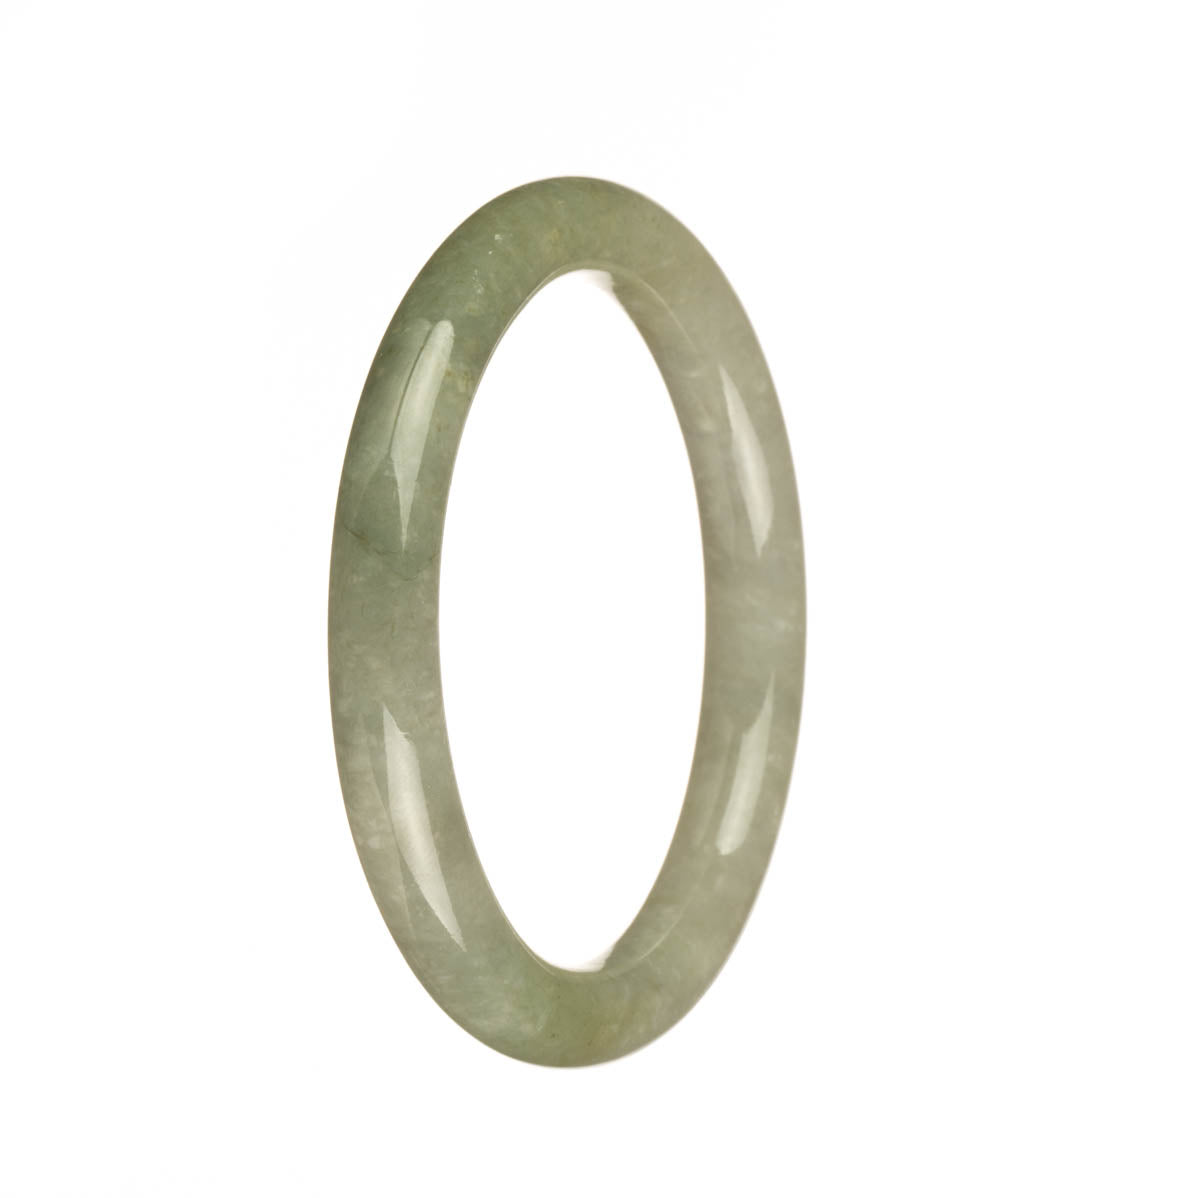 Real Grade A Olive Green Jadeite Bangle - 55mm Petite Round